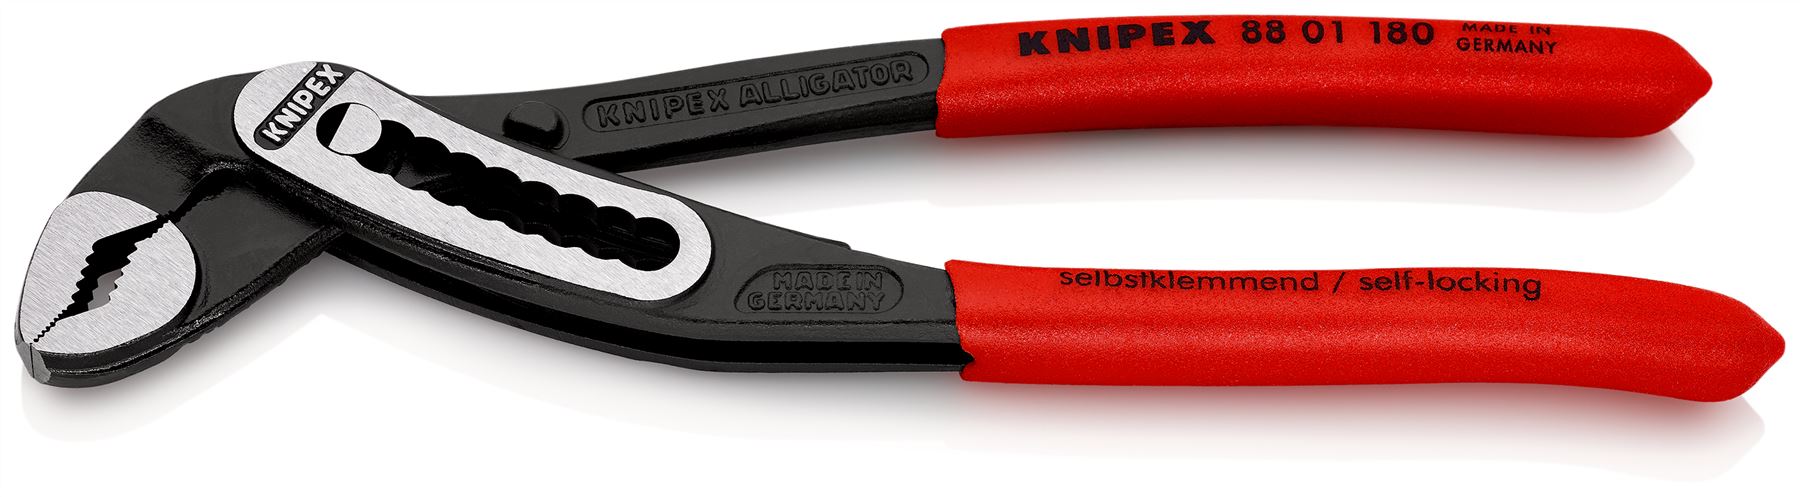 KNIPEX Alligator Water Pump Pliers 180mm Plastic Coated Handles Non Slip 88 01 180